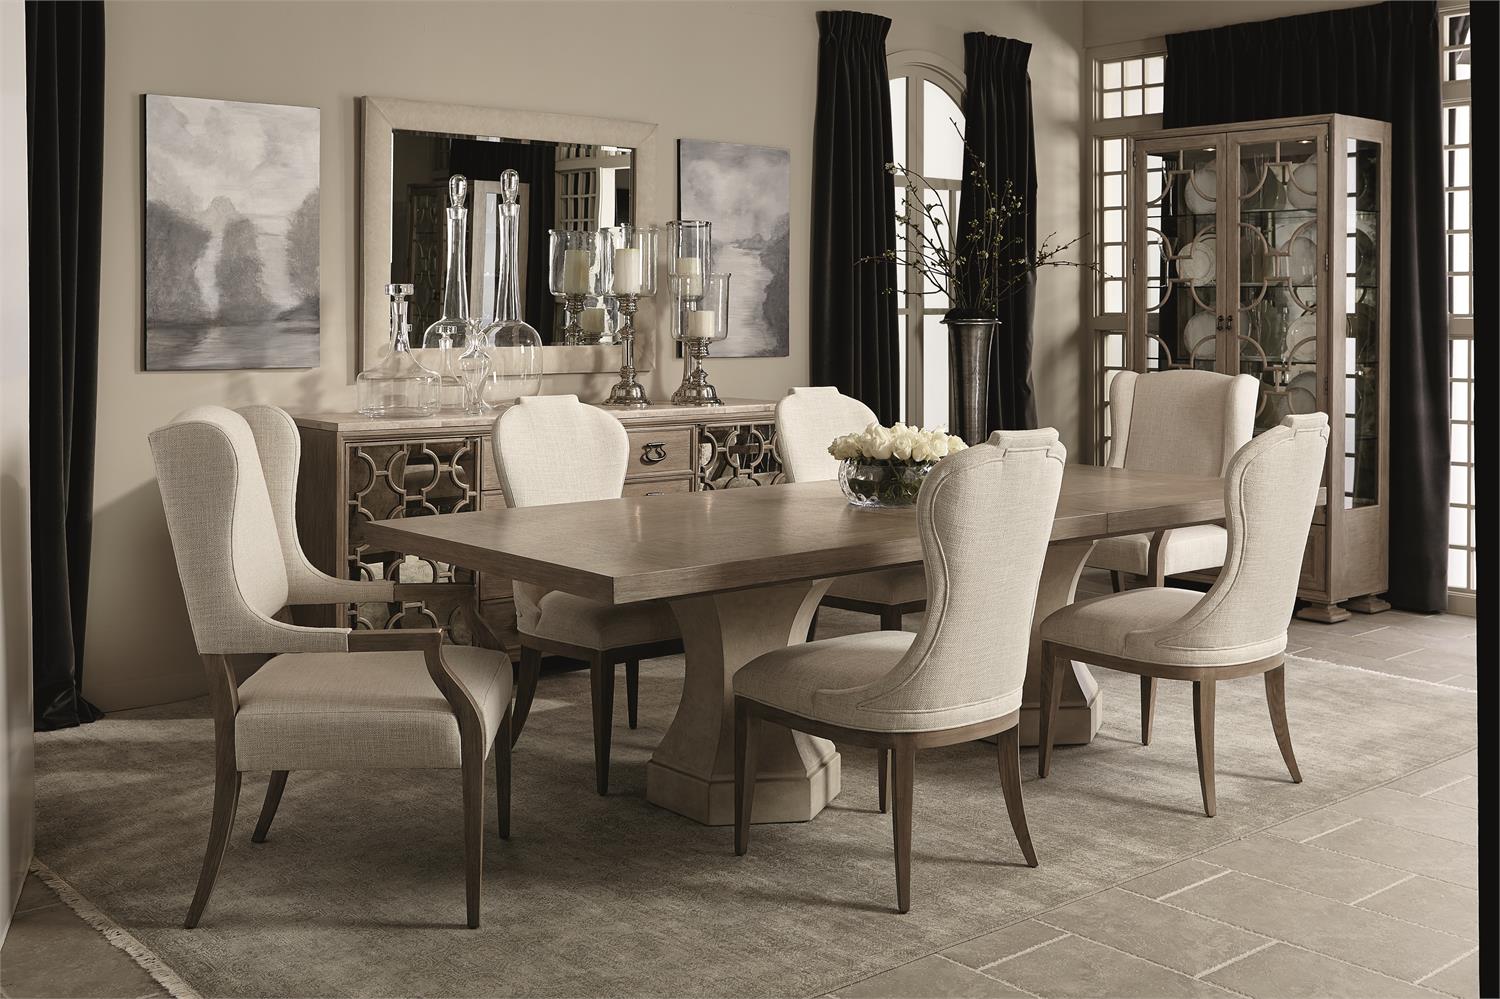 a dining room table and chairs with white upholstered chairs